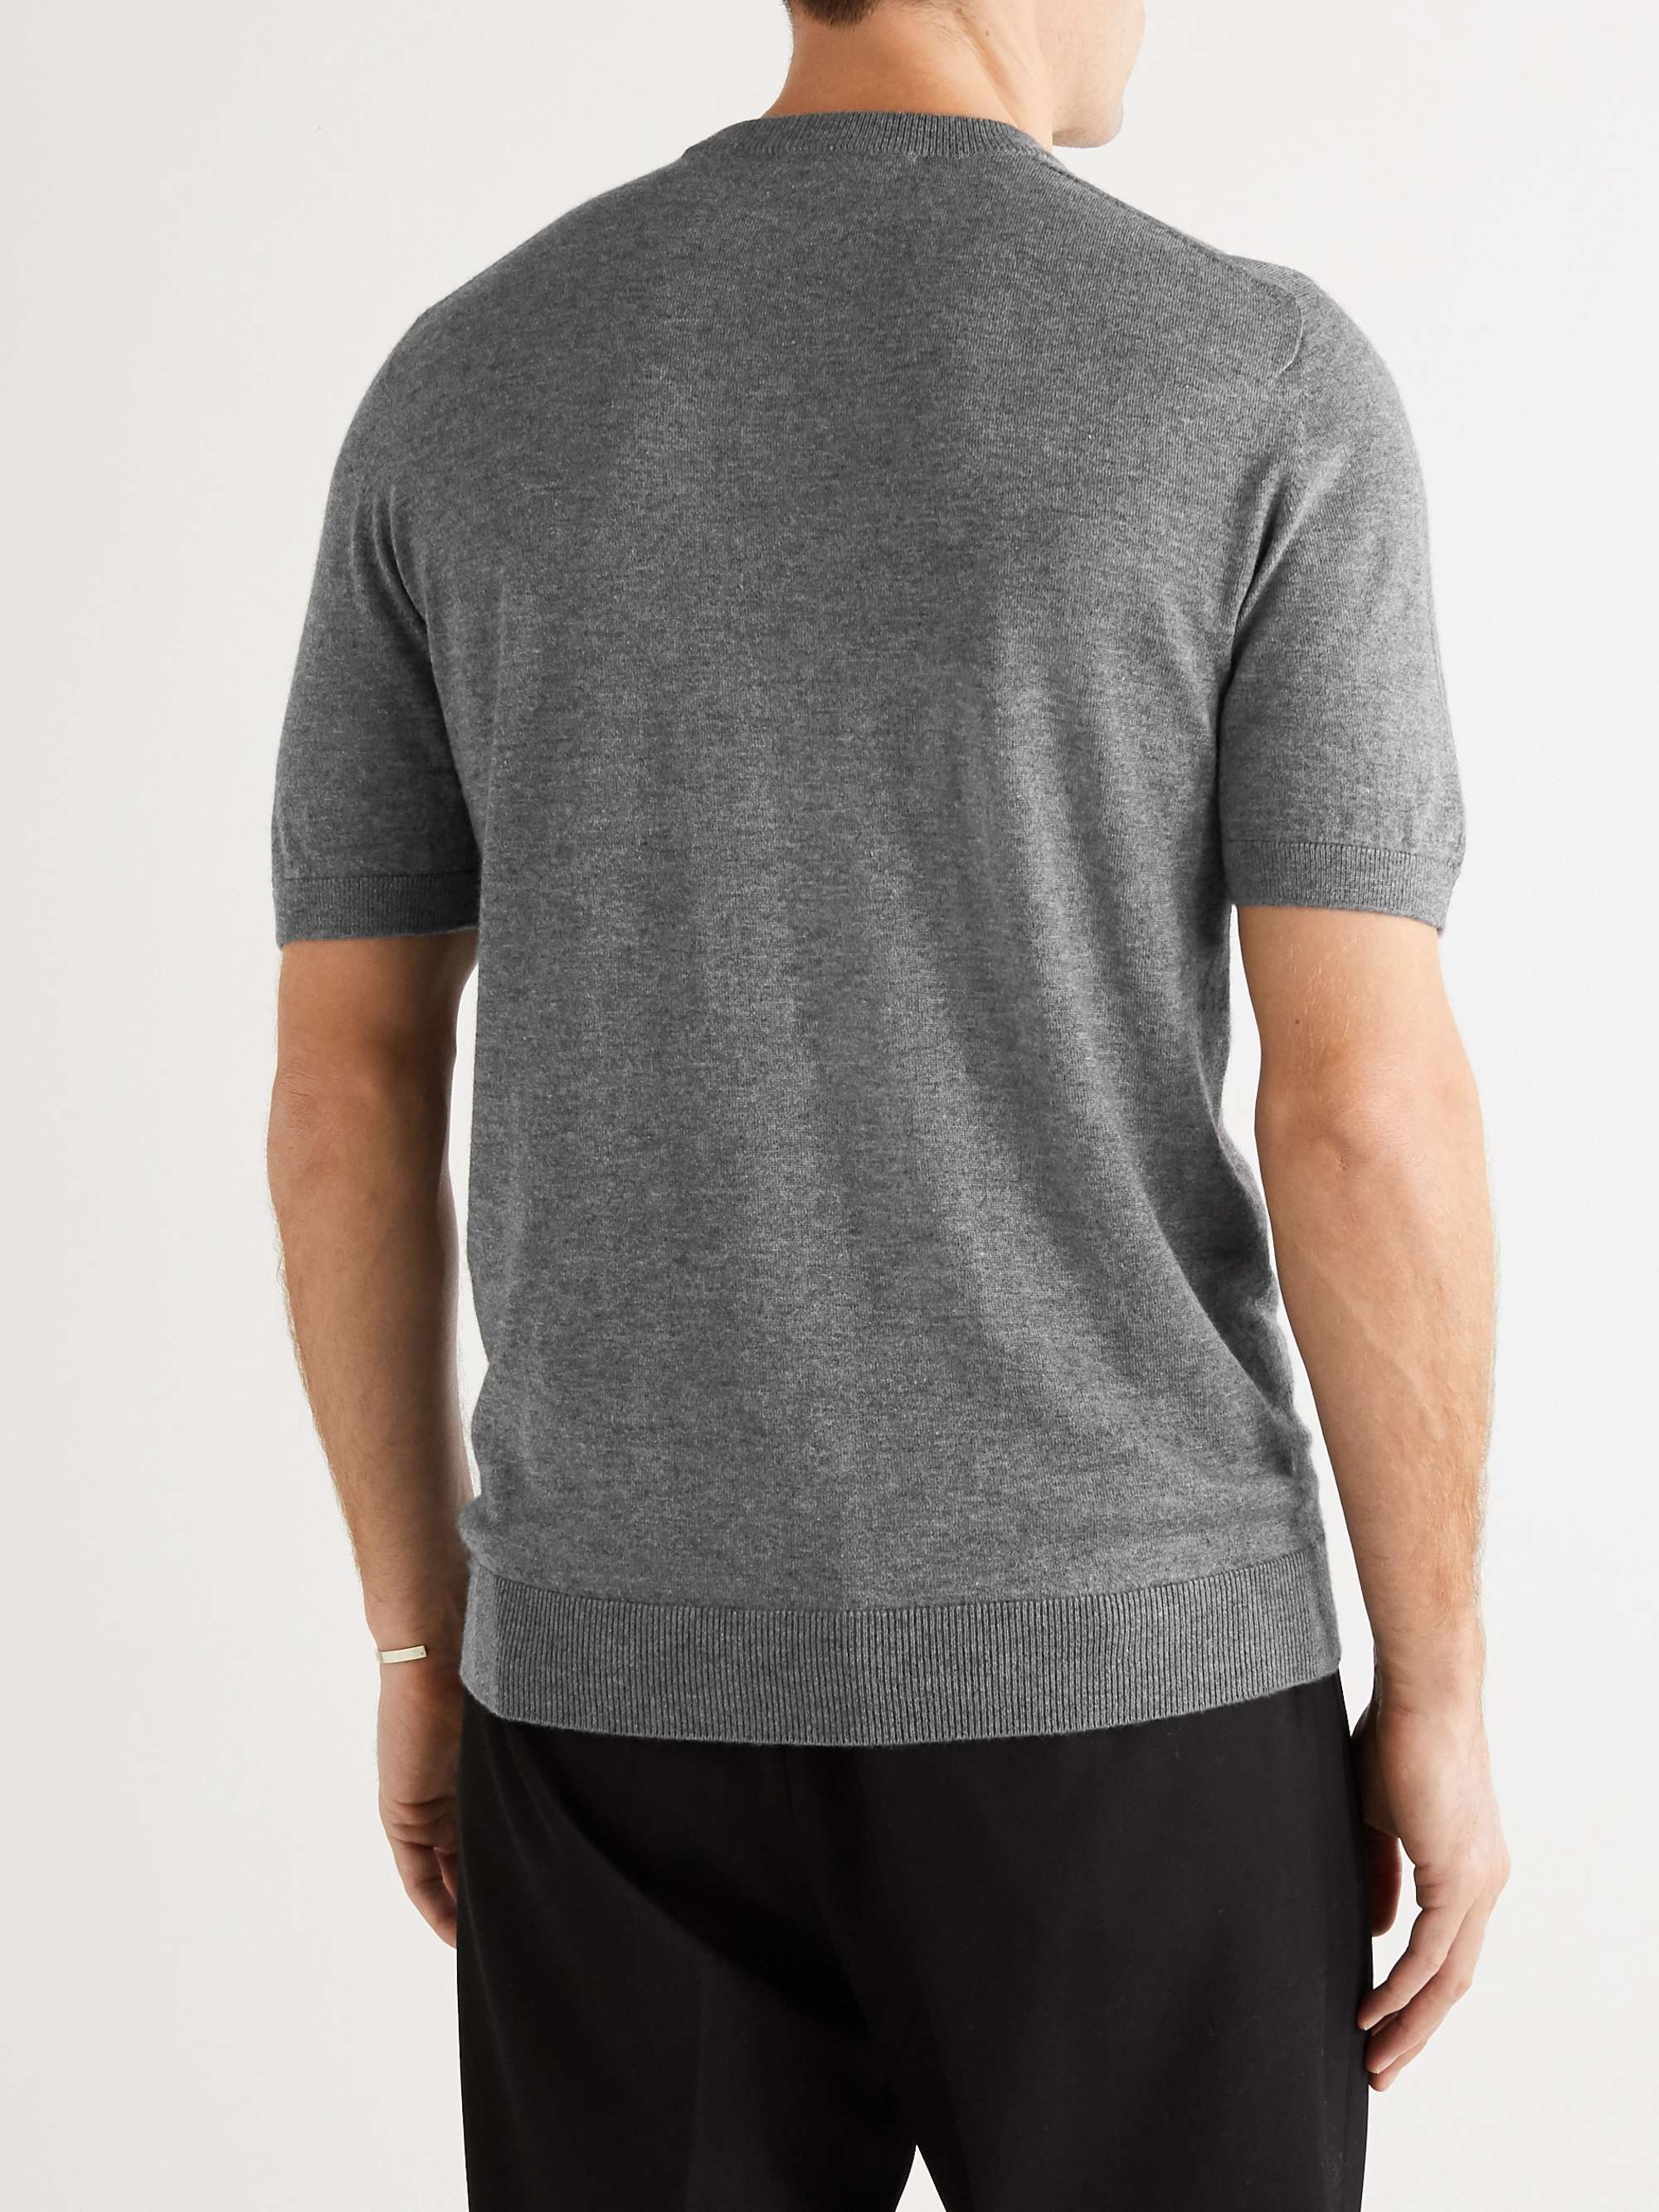 MR P. Knitted Cashmere and Silk-Blend T-Shirt